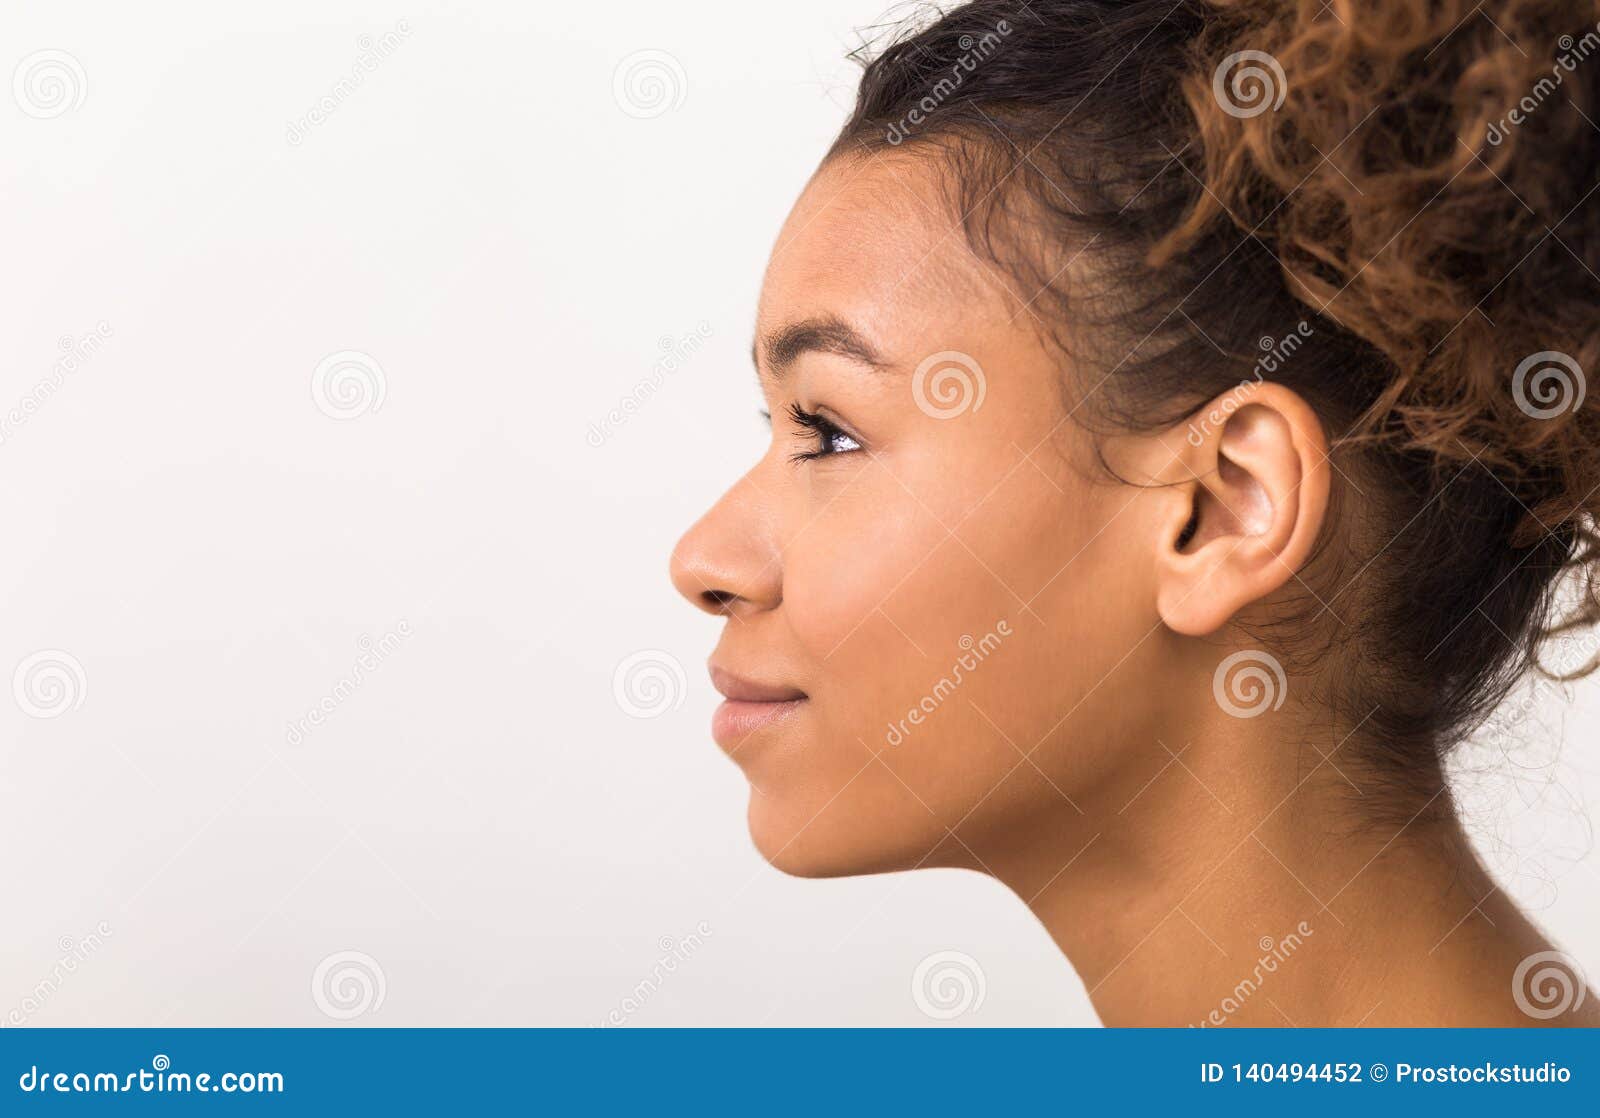 Woman Profile Portrait with Perfect Fresh Clean Skin Stock Photo ...